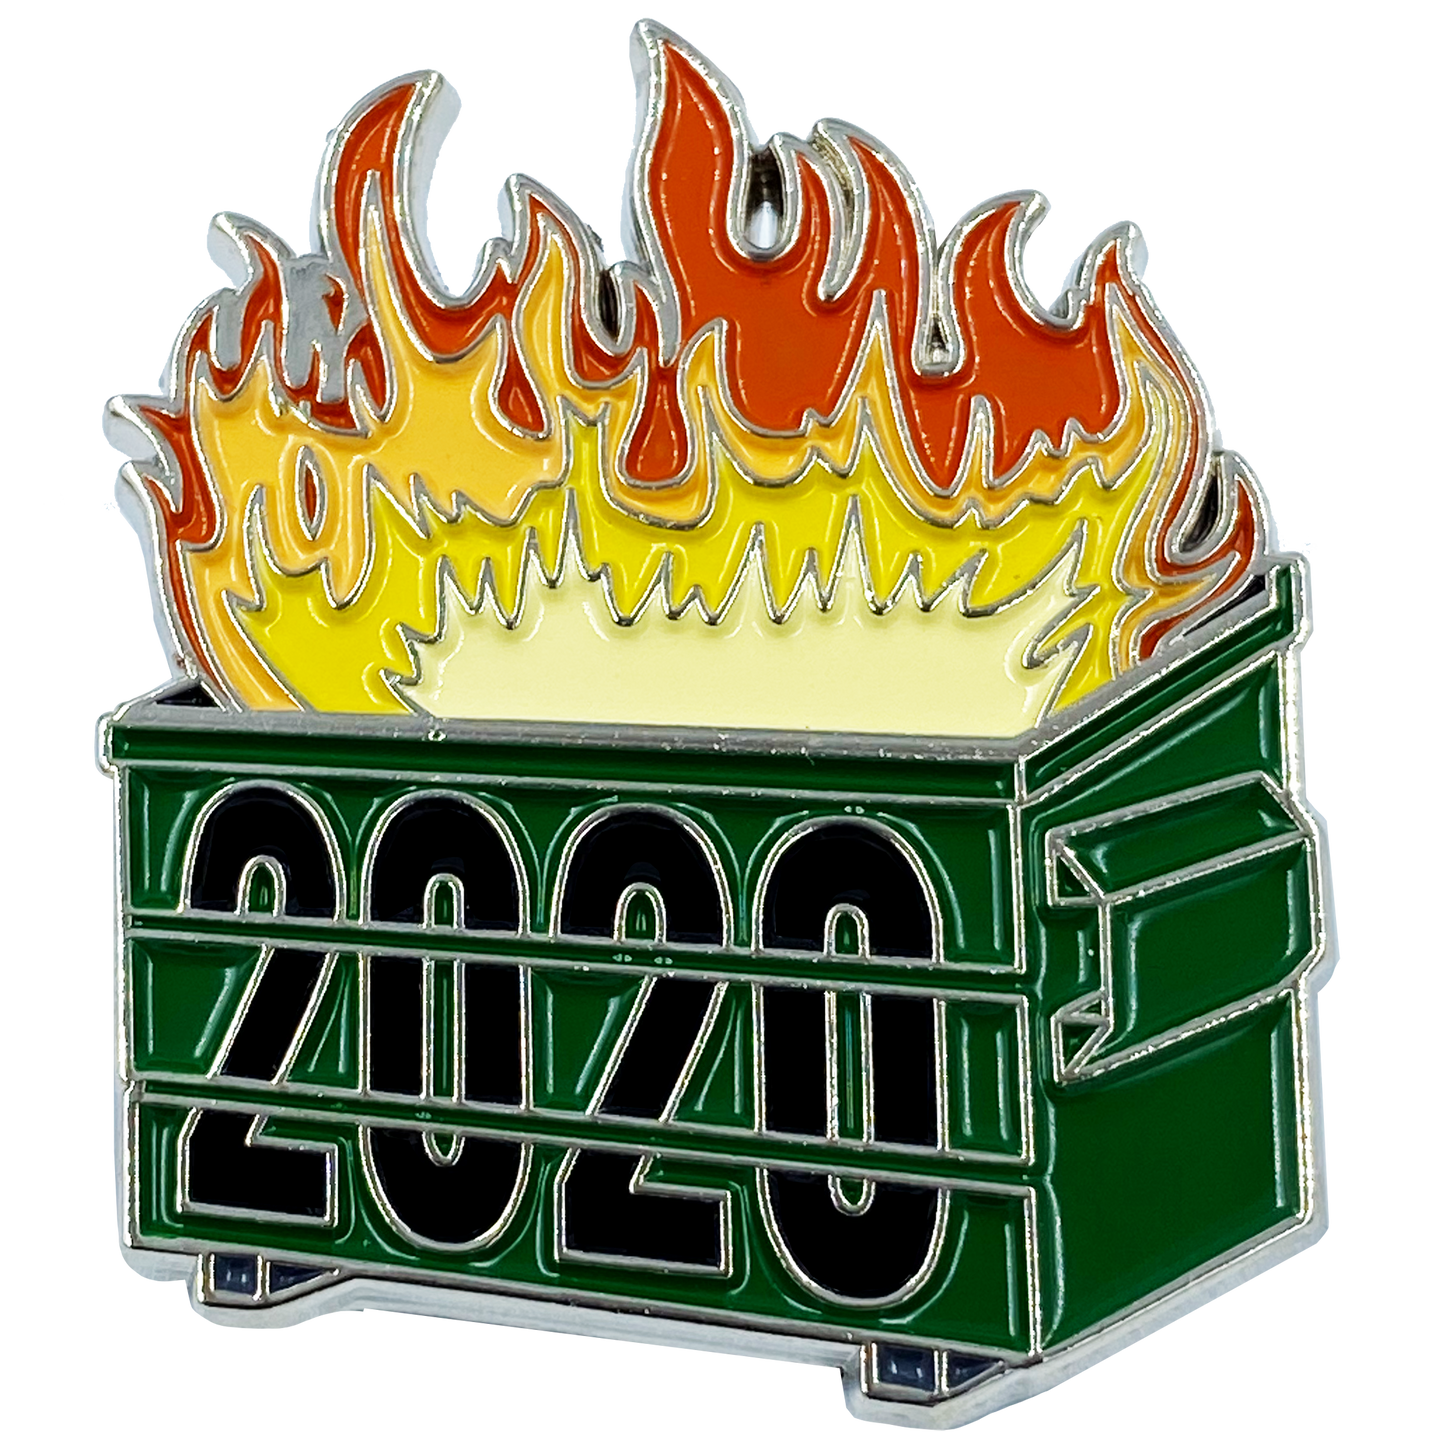 DL2-09 Official 2020 Dumpster Fire Collectible Pin with dual pin posts Pandemic, Killer Wasps, Riots, Police, Rioters